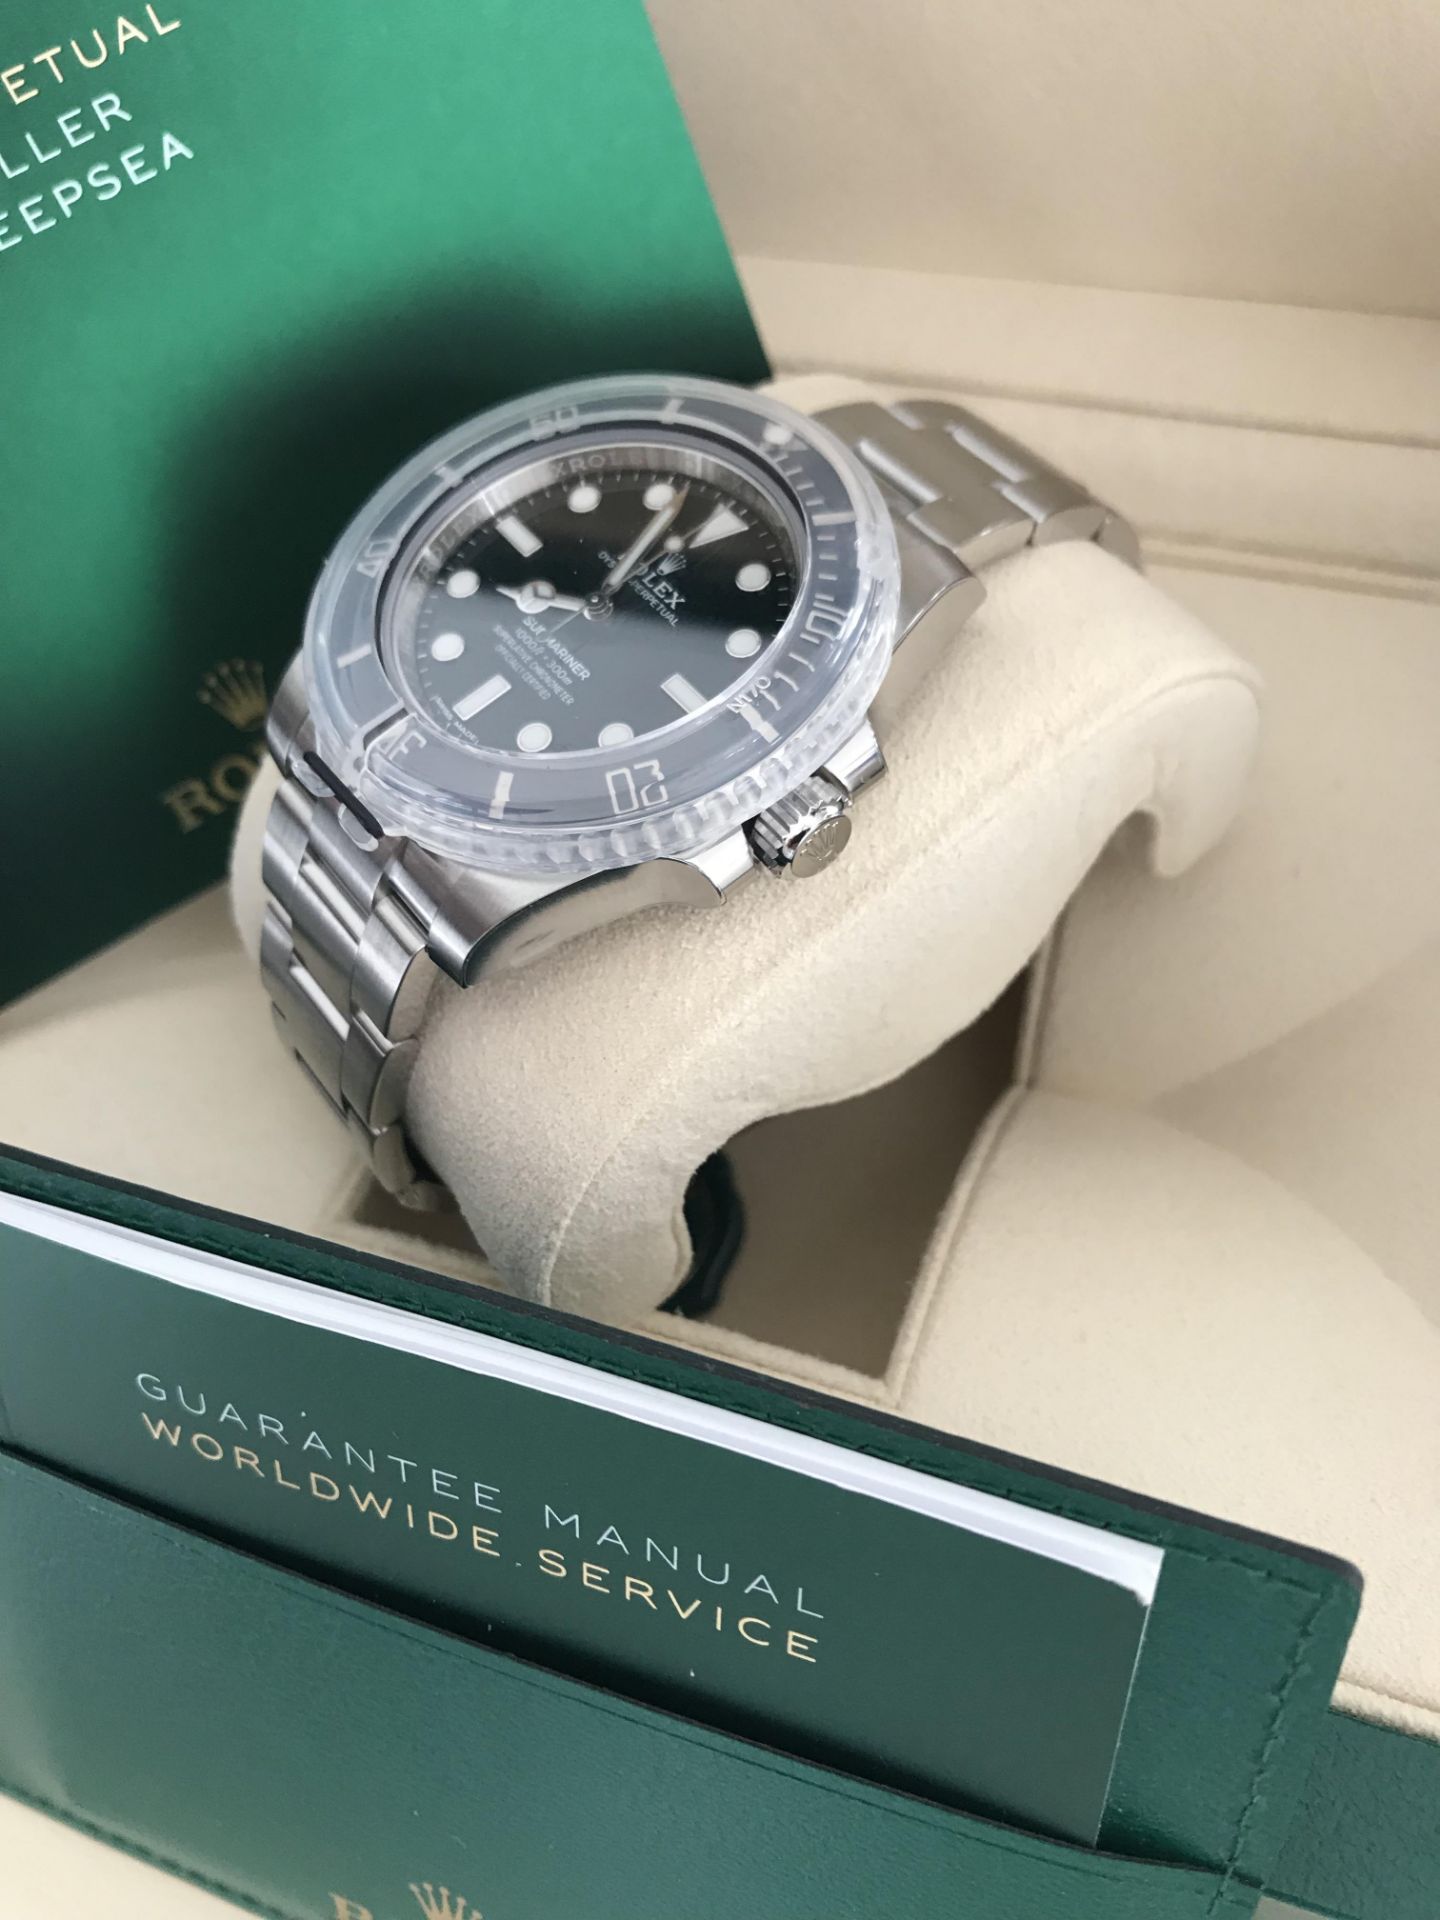 2020 ROLEX SUBMARINER OYSTER STEEL 40 MM WATCH 114060 - Image 6 of 10